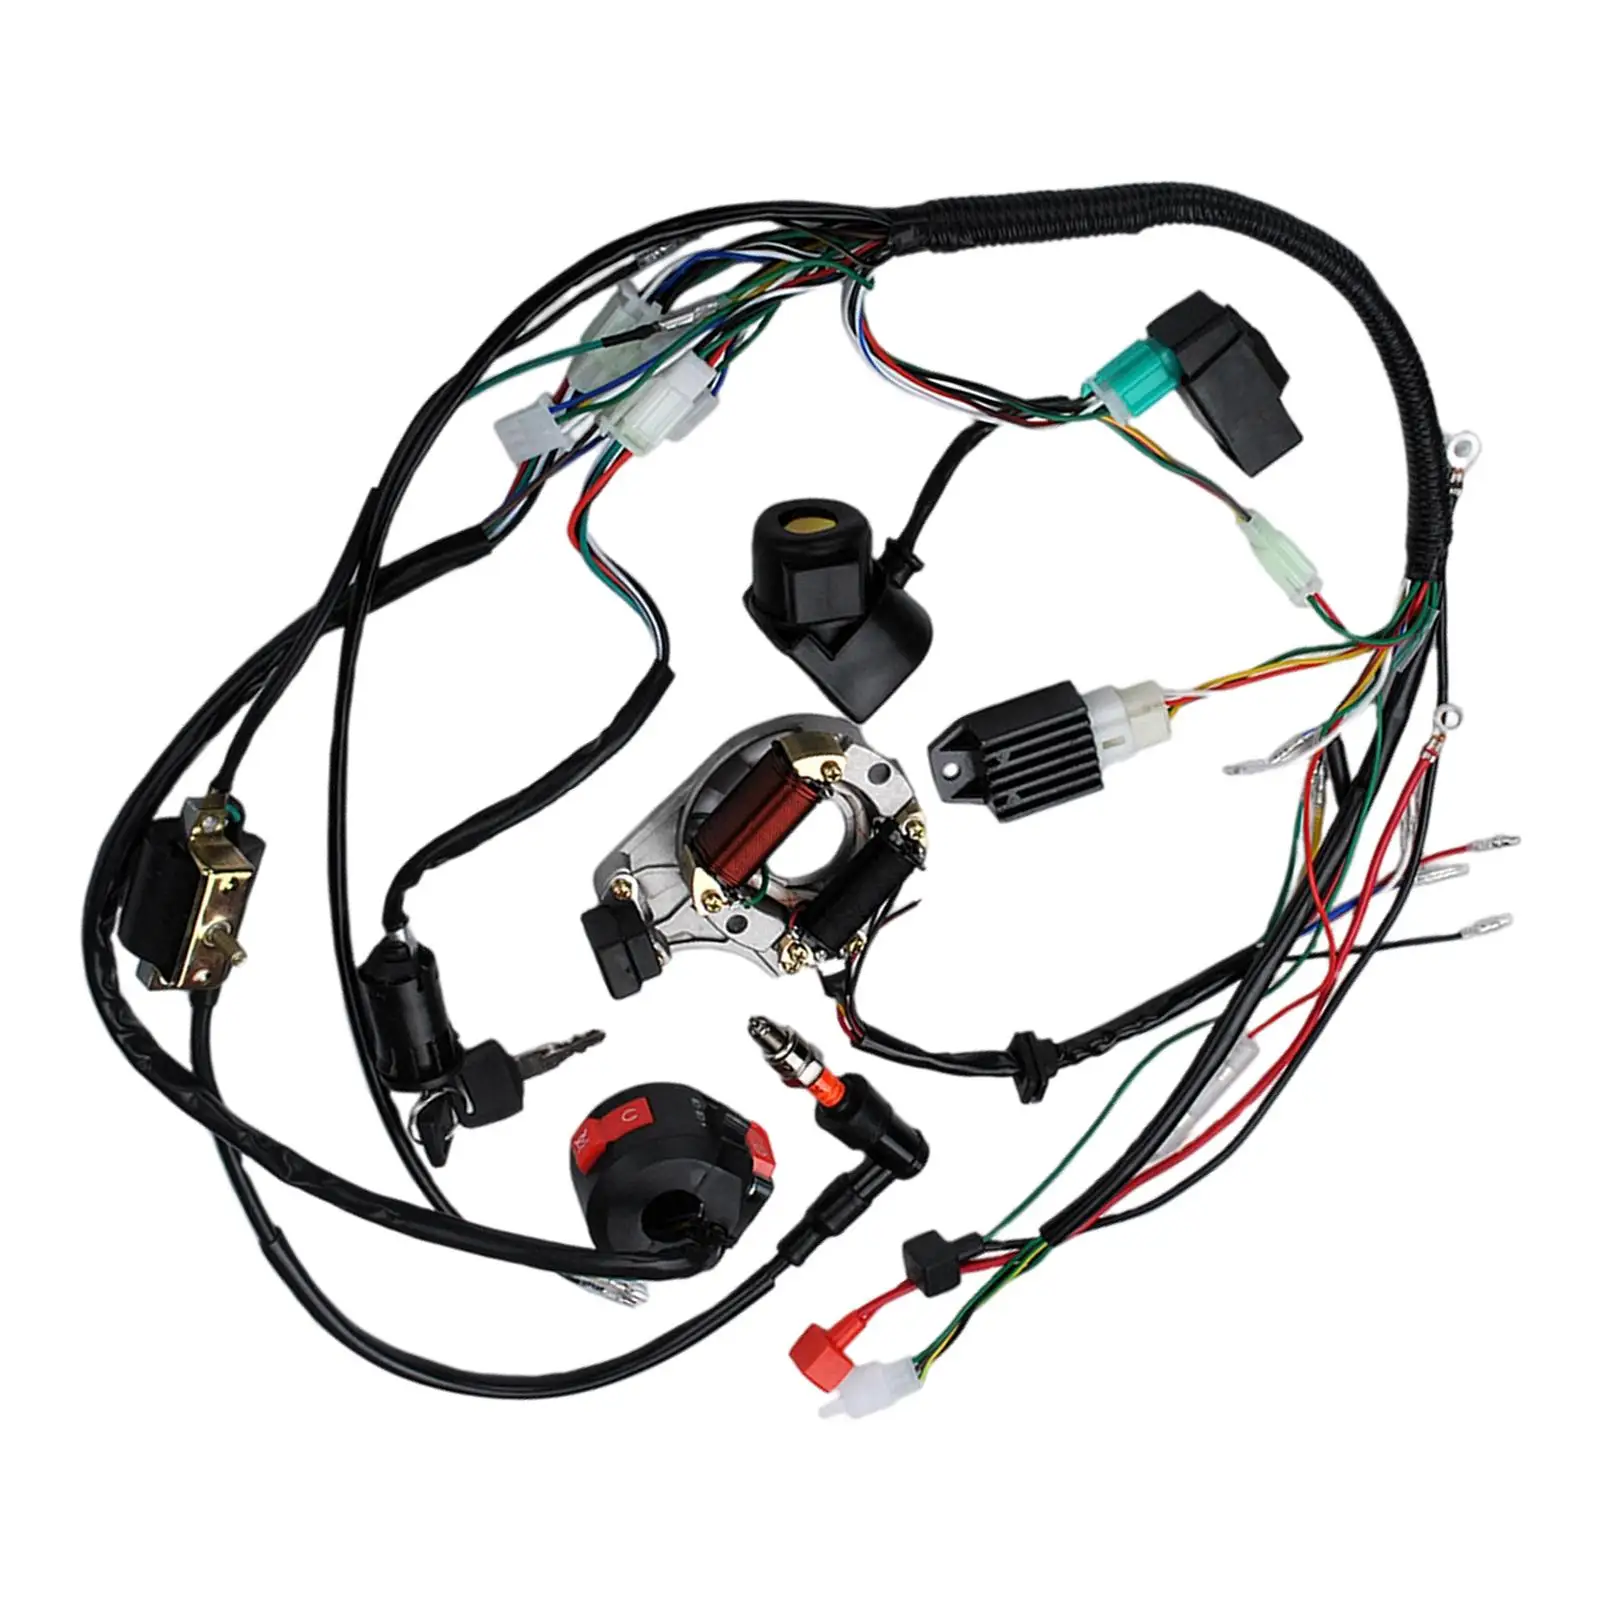 Complete Electrics Wire Harness Kit for Motorcycle 4 Wheelers Stroke